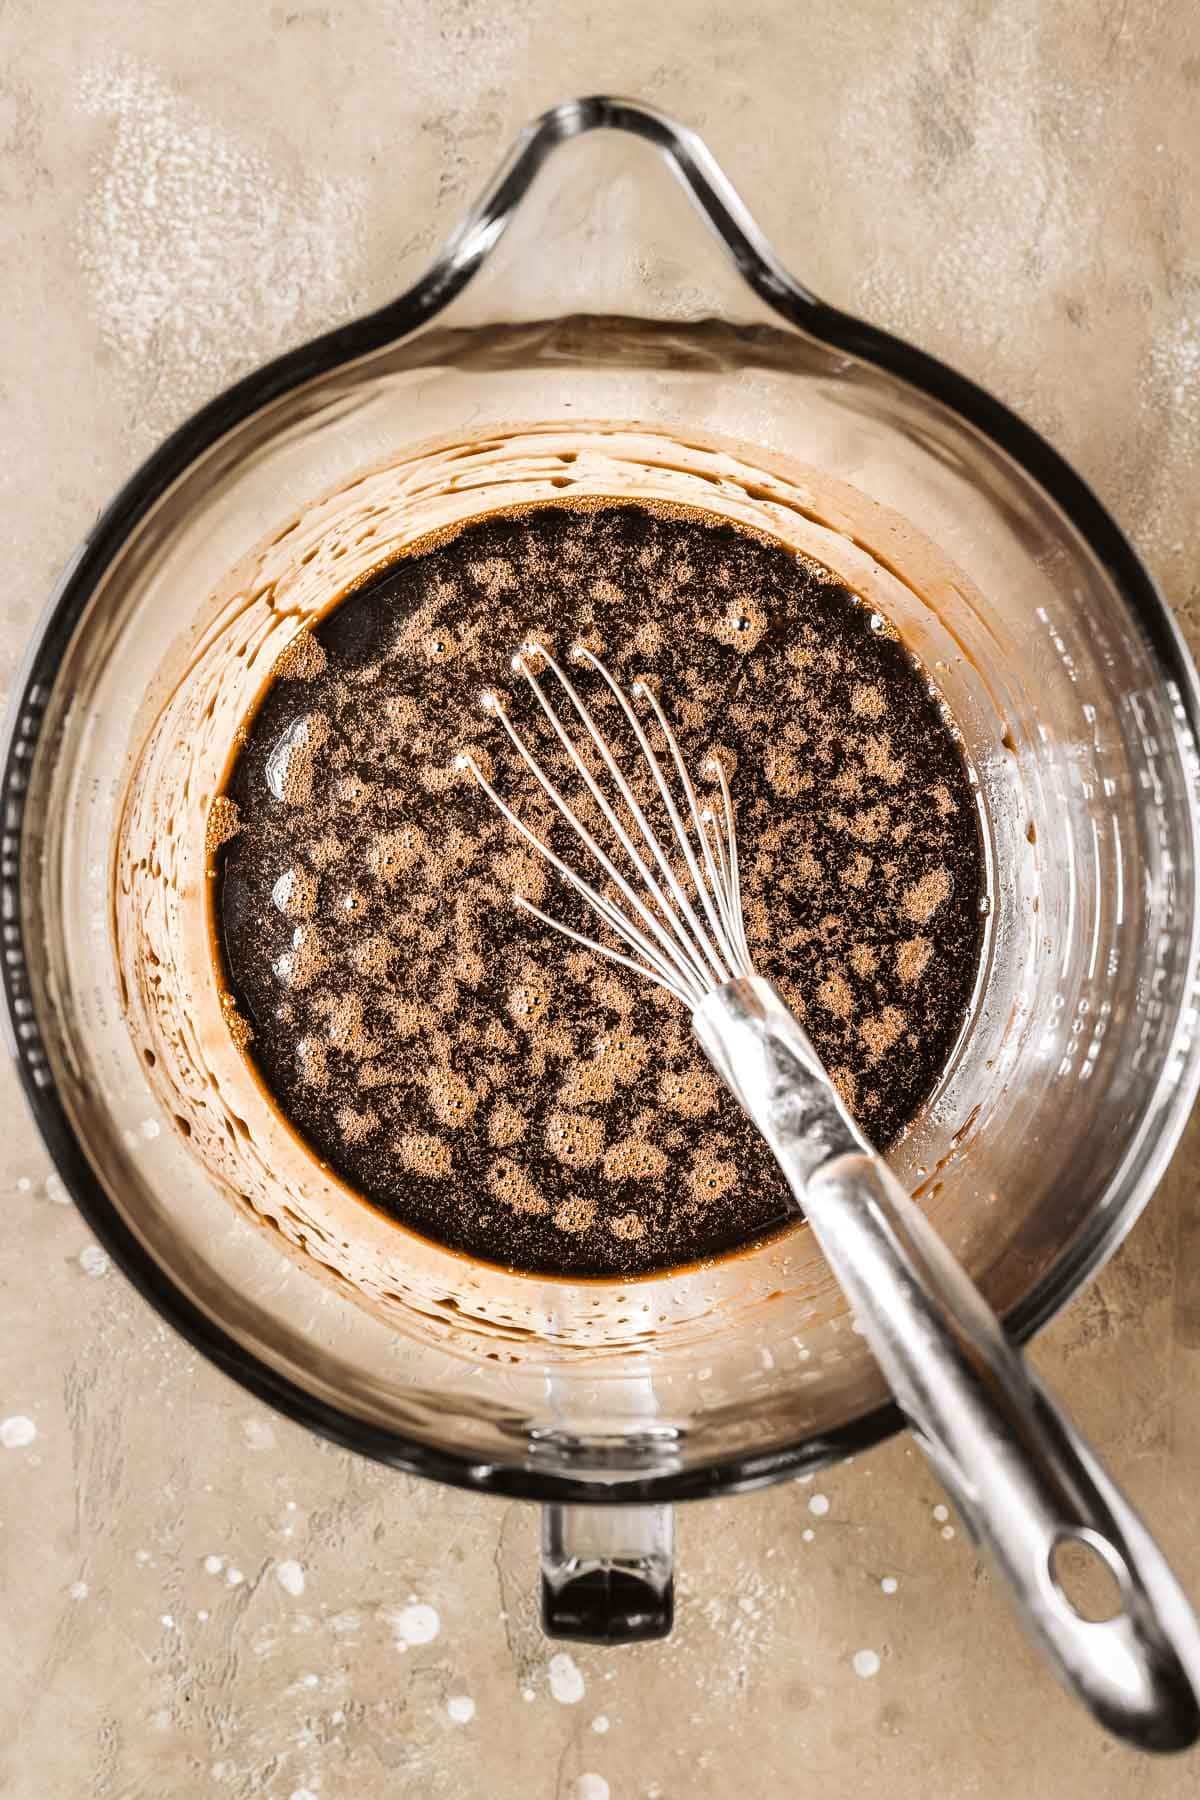 A glass mixing bowl filled with wet ingredients for cake batter.